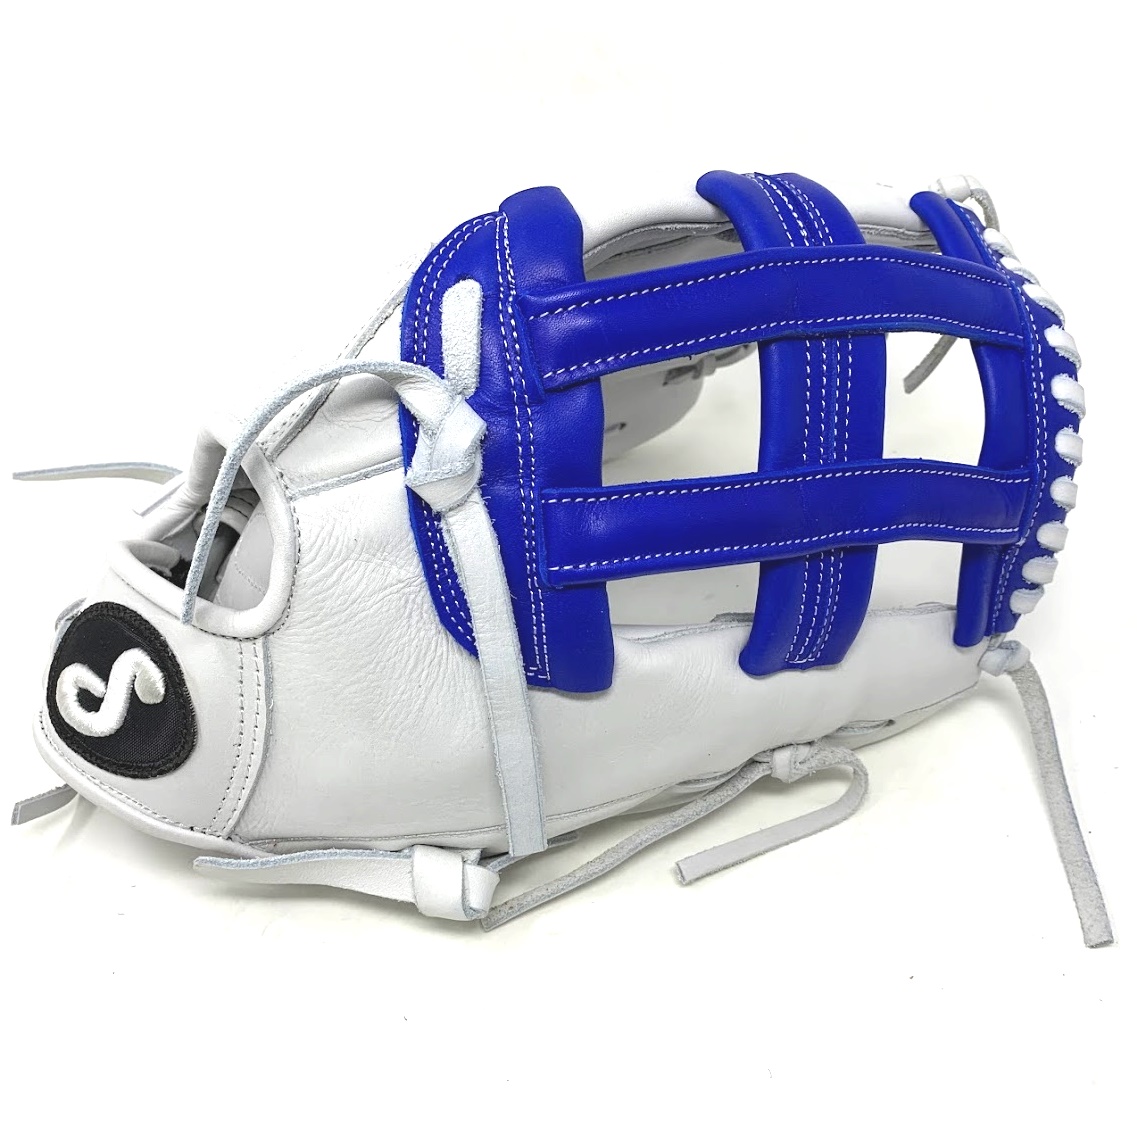 soto-white-15-inch-h-web-slow-pitch-softball-glove-right-hand-throw SS20-15-WHRY-H-RightHandThrow soto  <span style=font-size medium;><strong>Made in Mexico</strong></span>   <img class=__mce_add_custom__ title=mexico-flag-50.jpg src=  